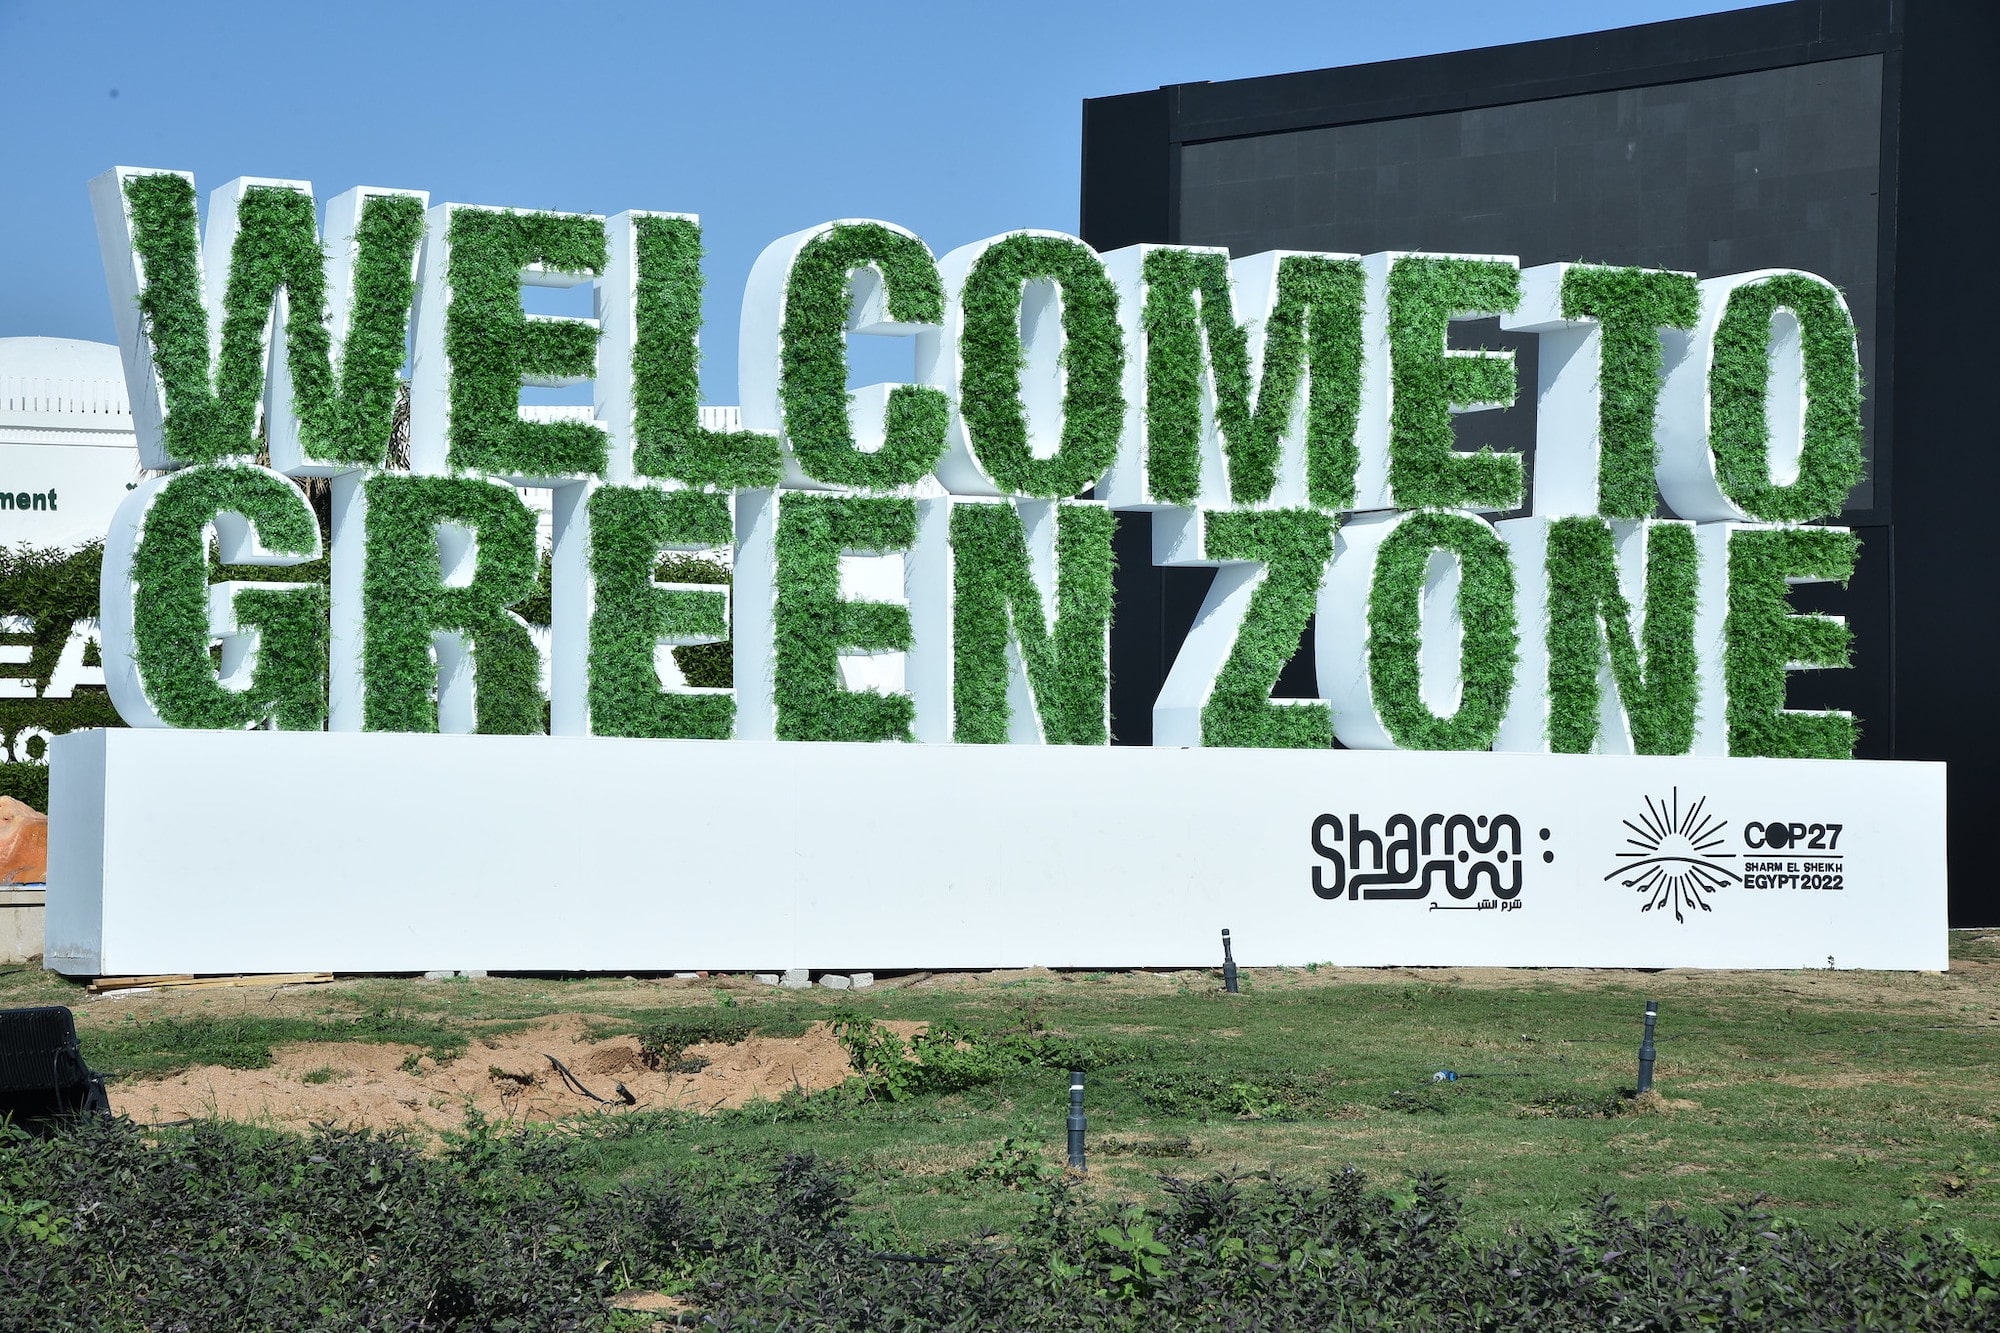 COP27, Sharm El-Sheikh, Egypt - Welcome to The Green Zone